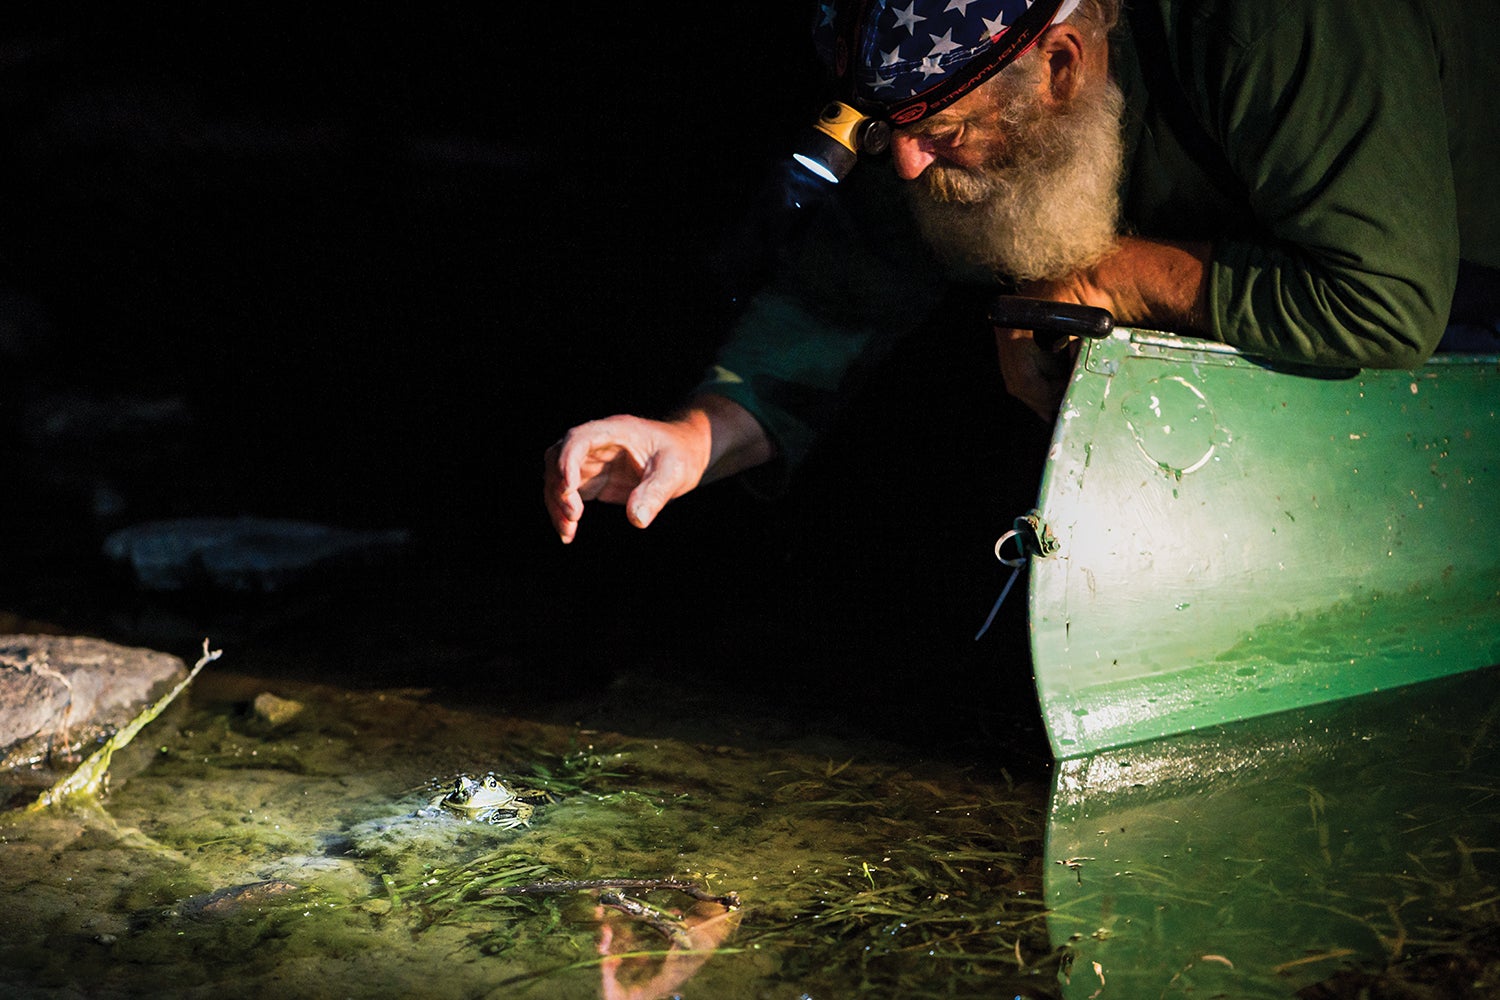 man wearing headlamp reaches for frog in water beside his canoe